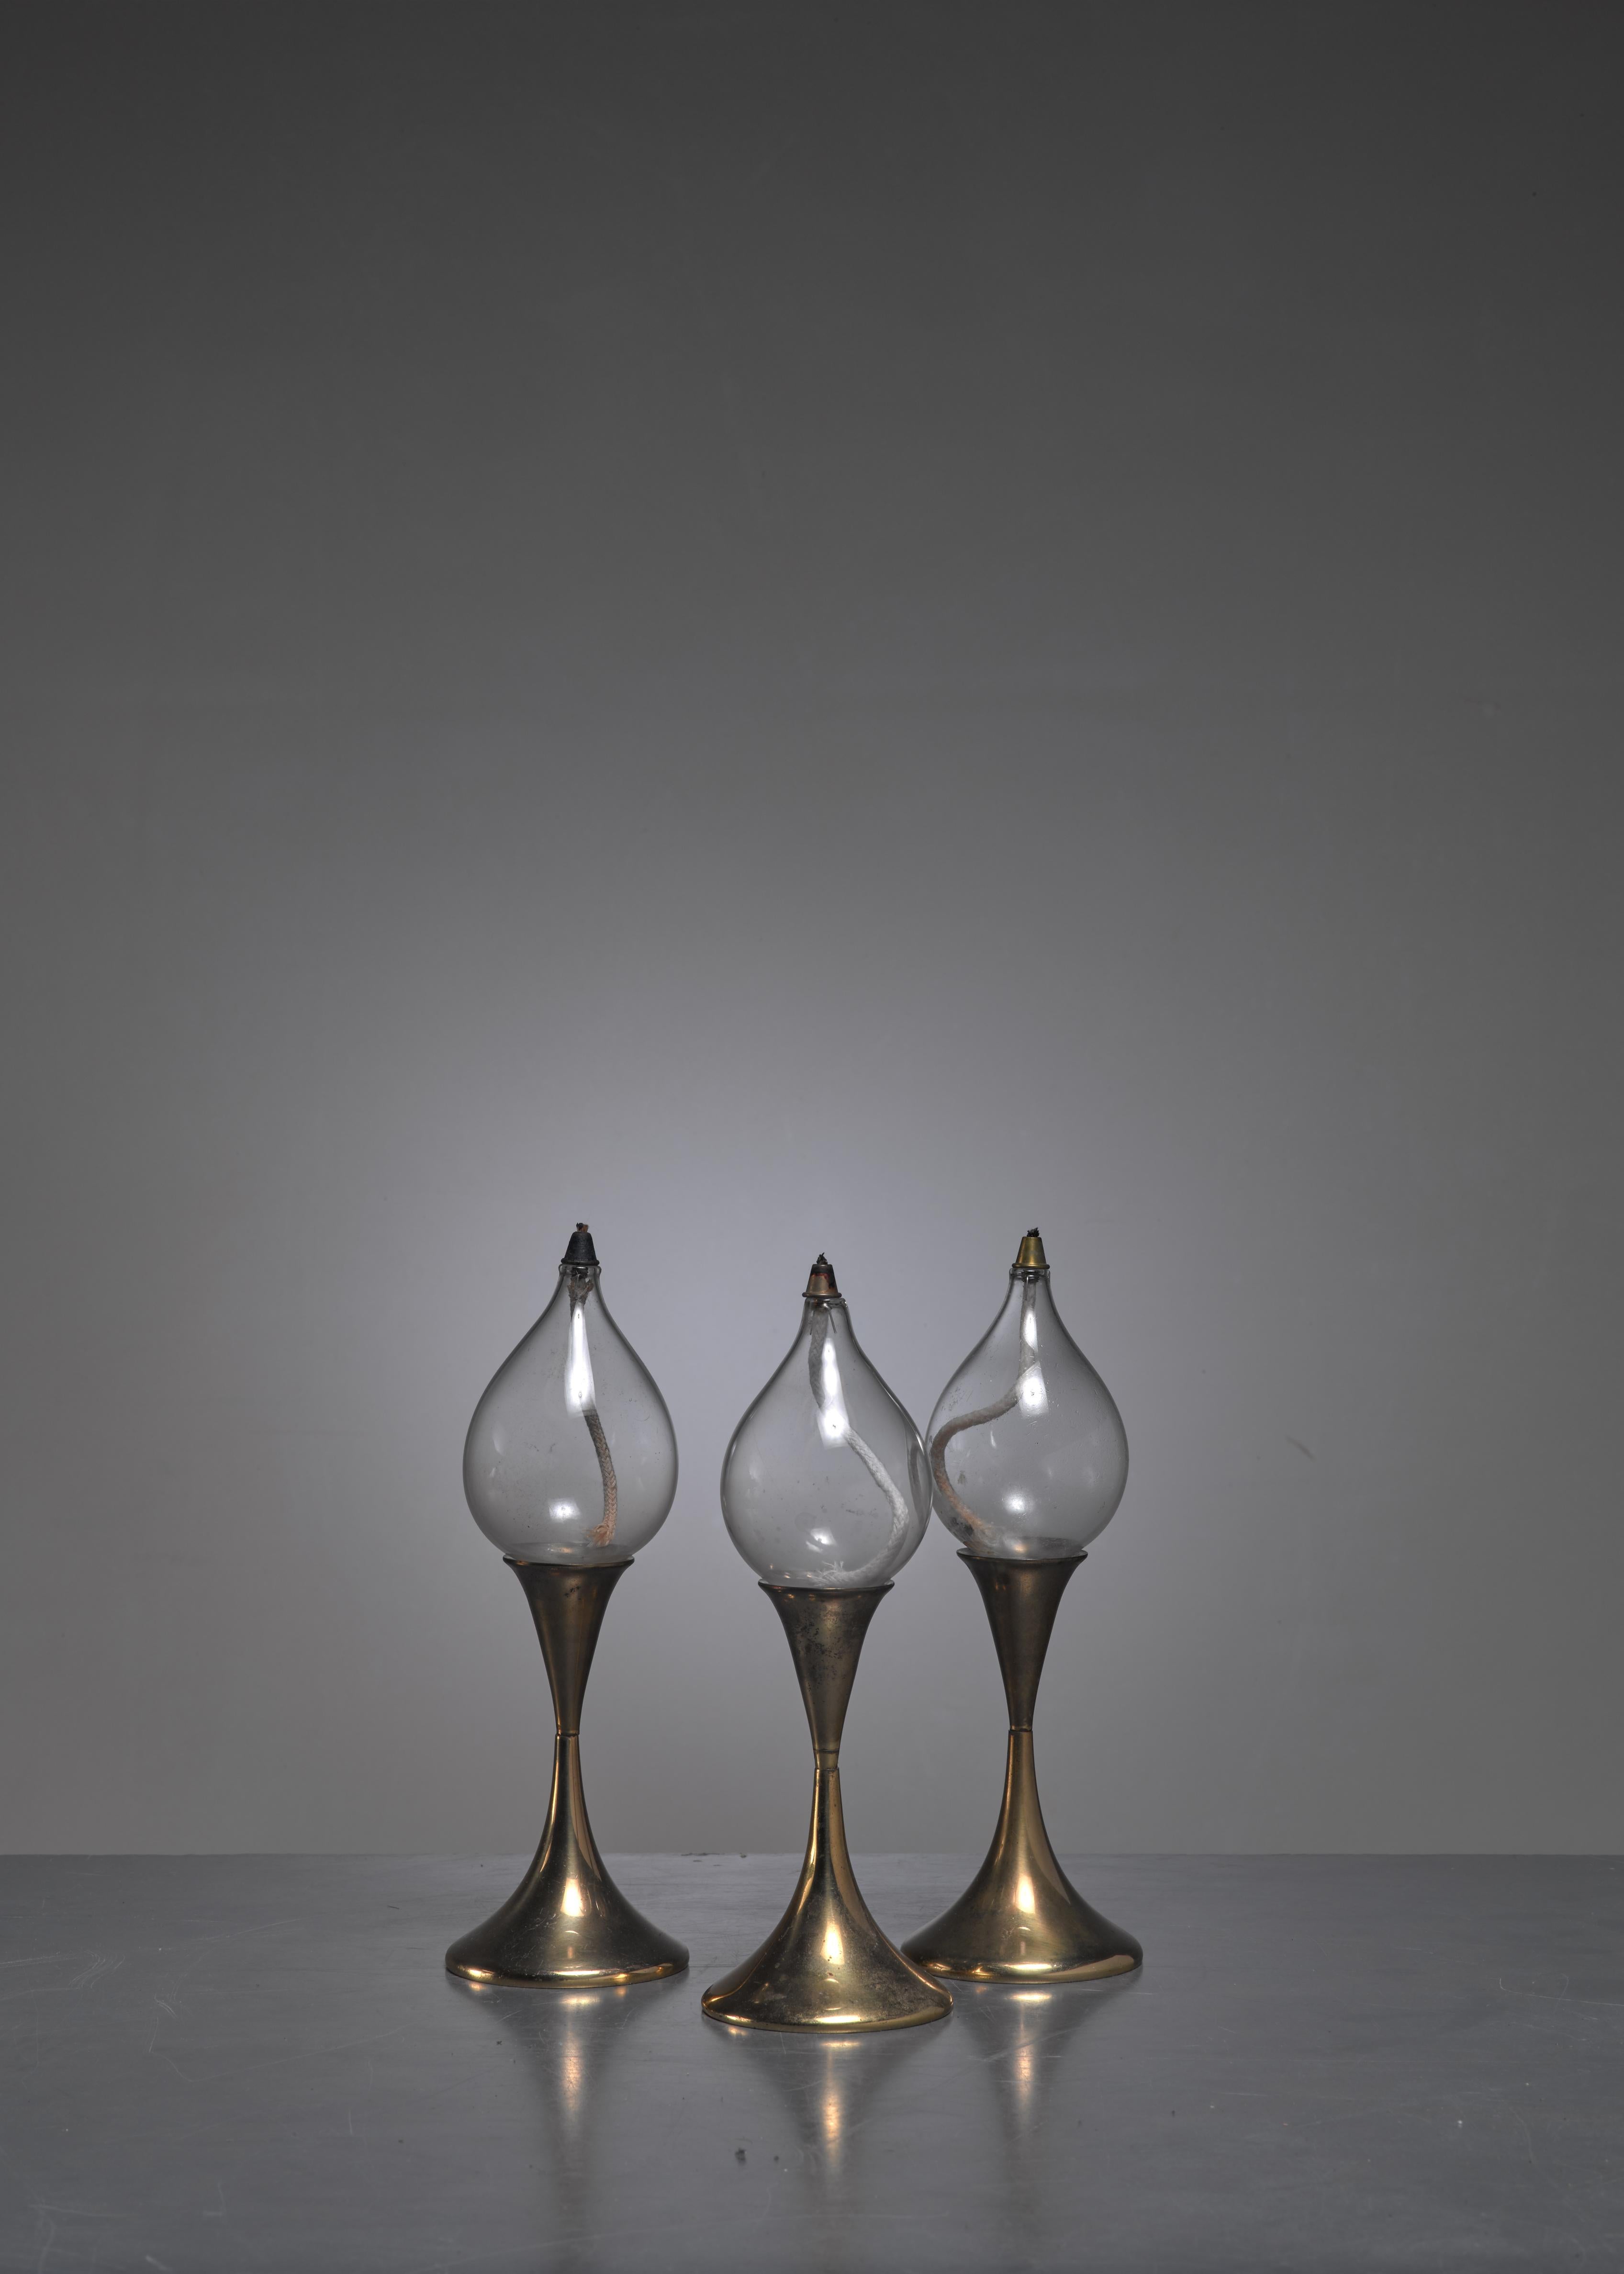 A set of three brass oil lamps or candle holders from Denmark. The pieces are made of brass and have a removable glass oil lamp. Without the glass part they can be used as a candle holder.

The height varies between 25 and 34 cm.

 